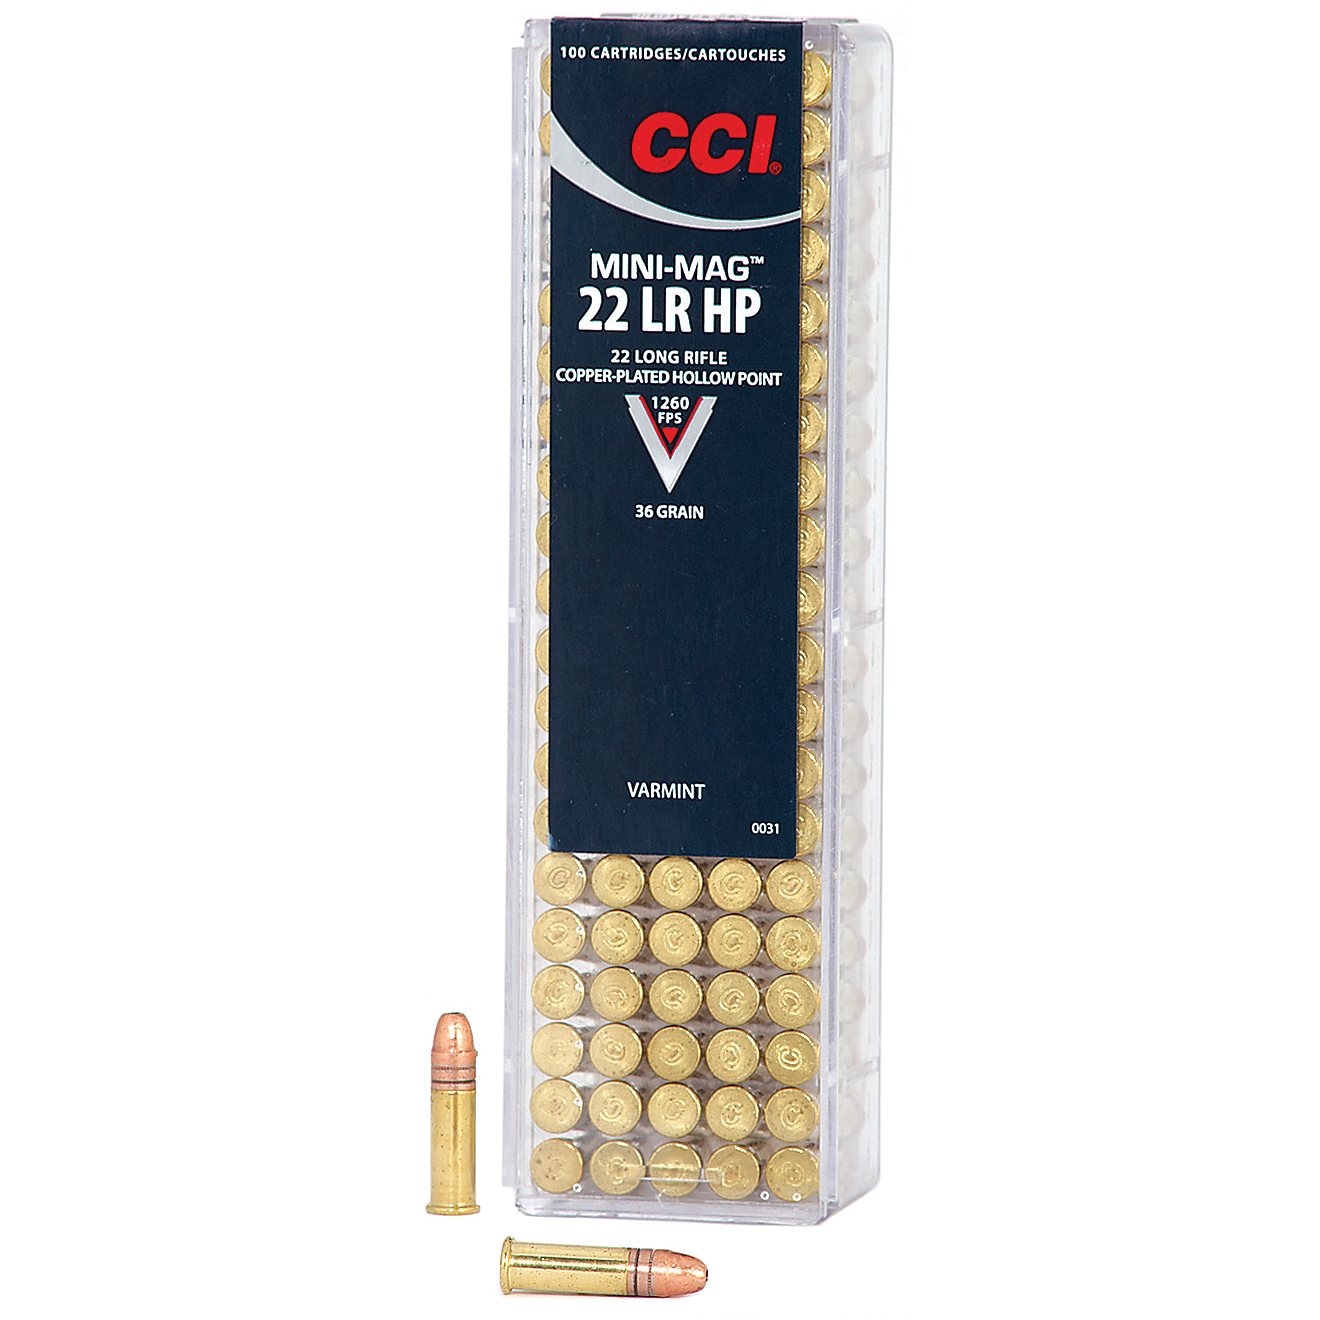 CCI Mini-Mag .22 LR Copper-Plated Hollow Point Ammunition - 100 Rounds                                                           - view number 1